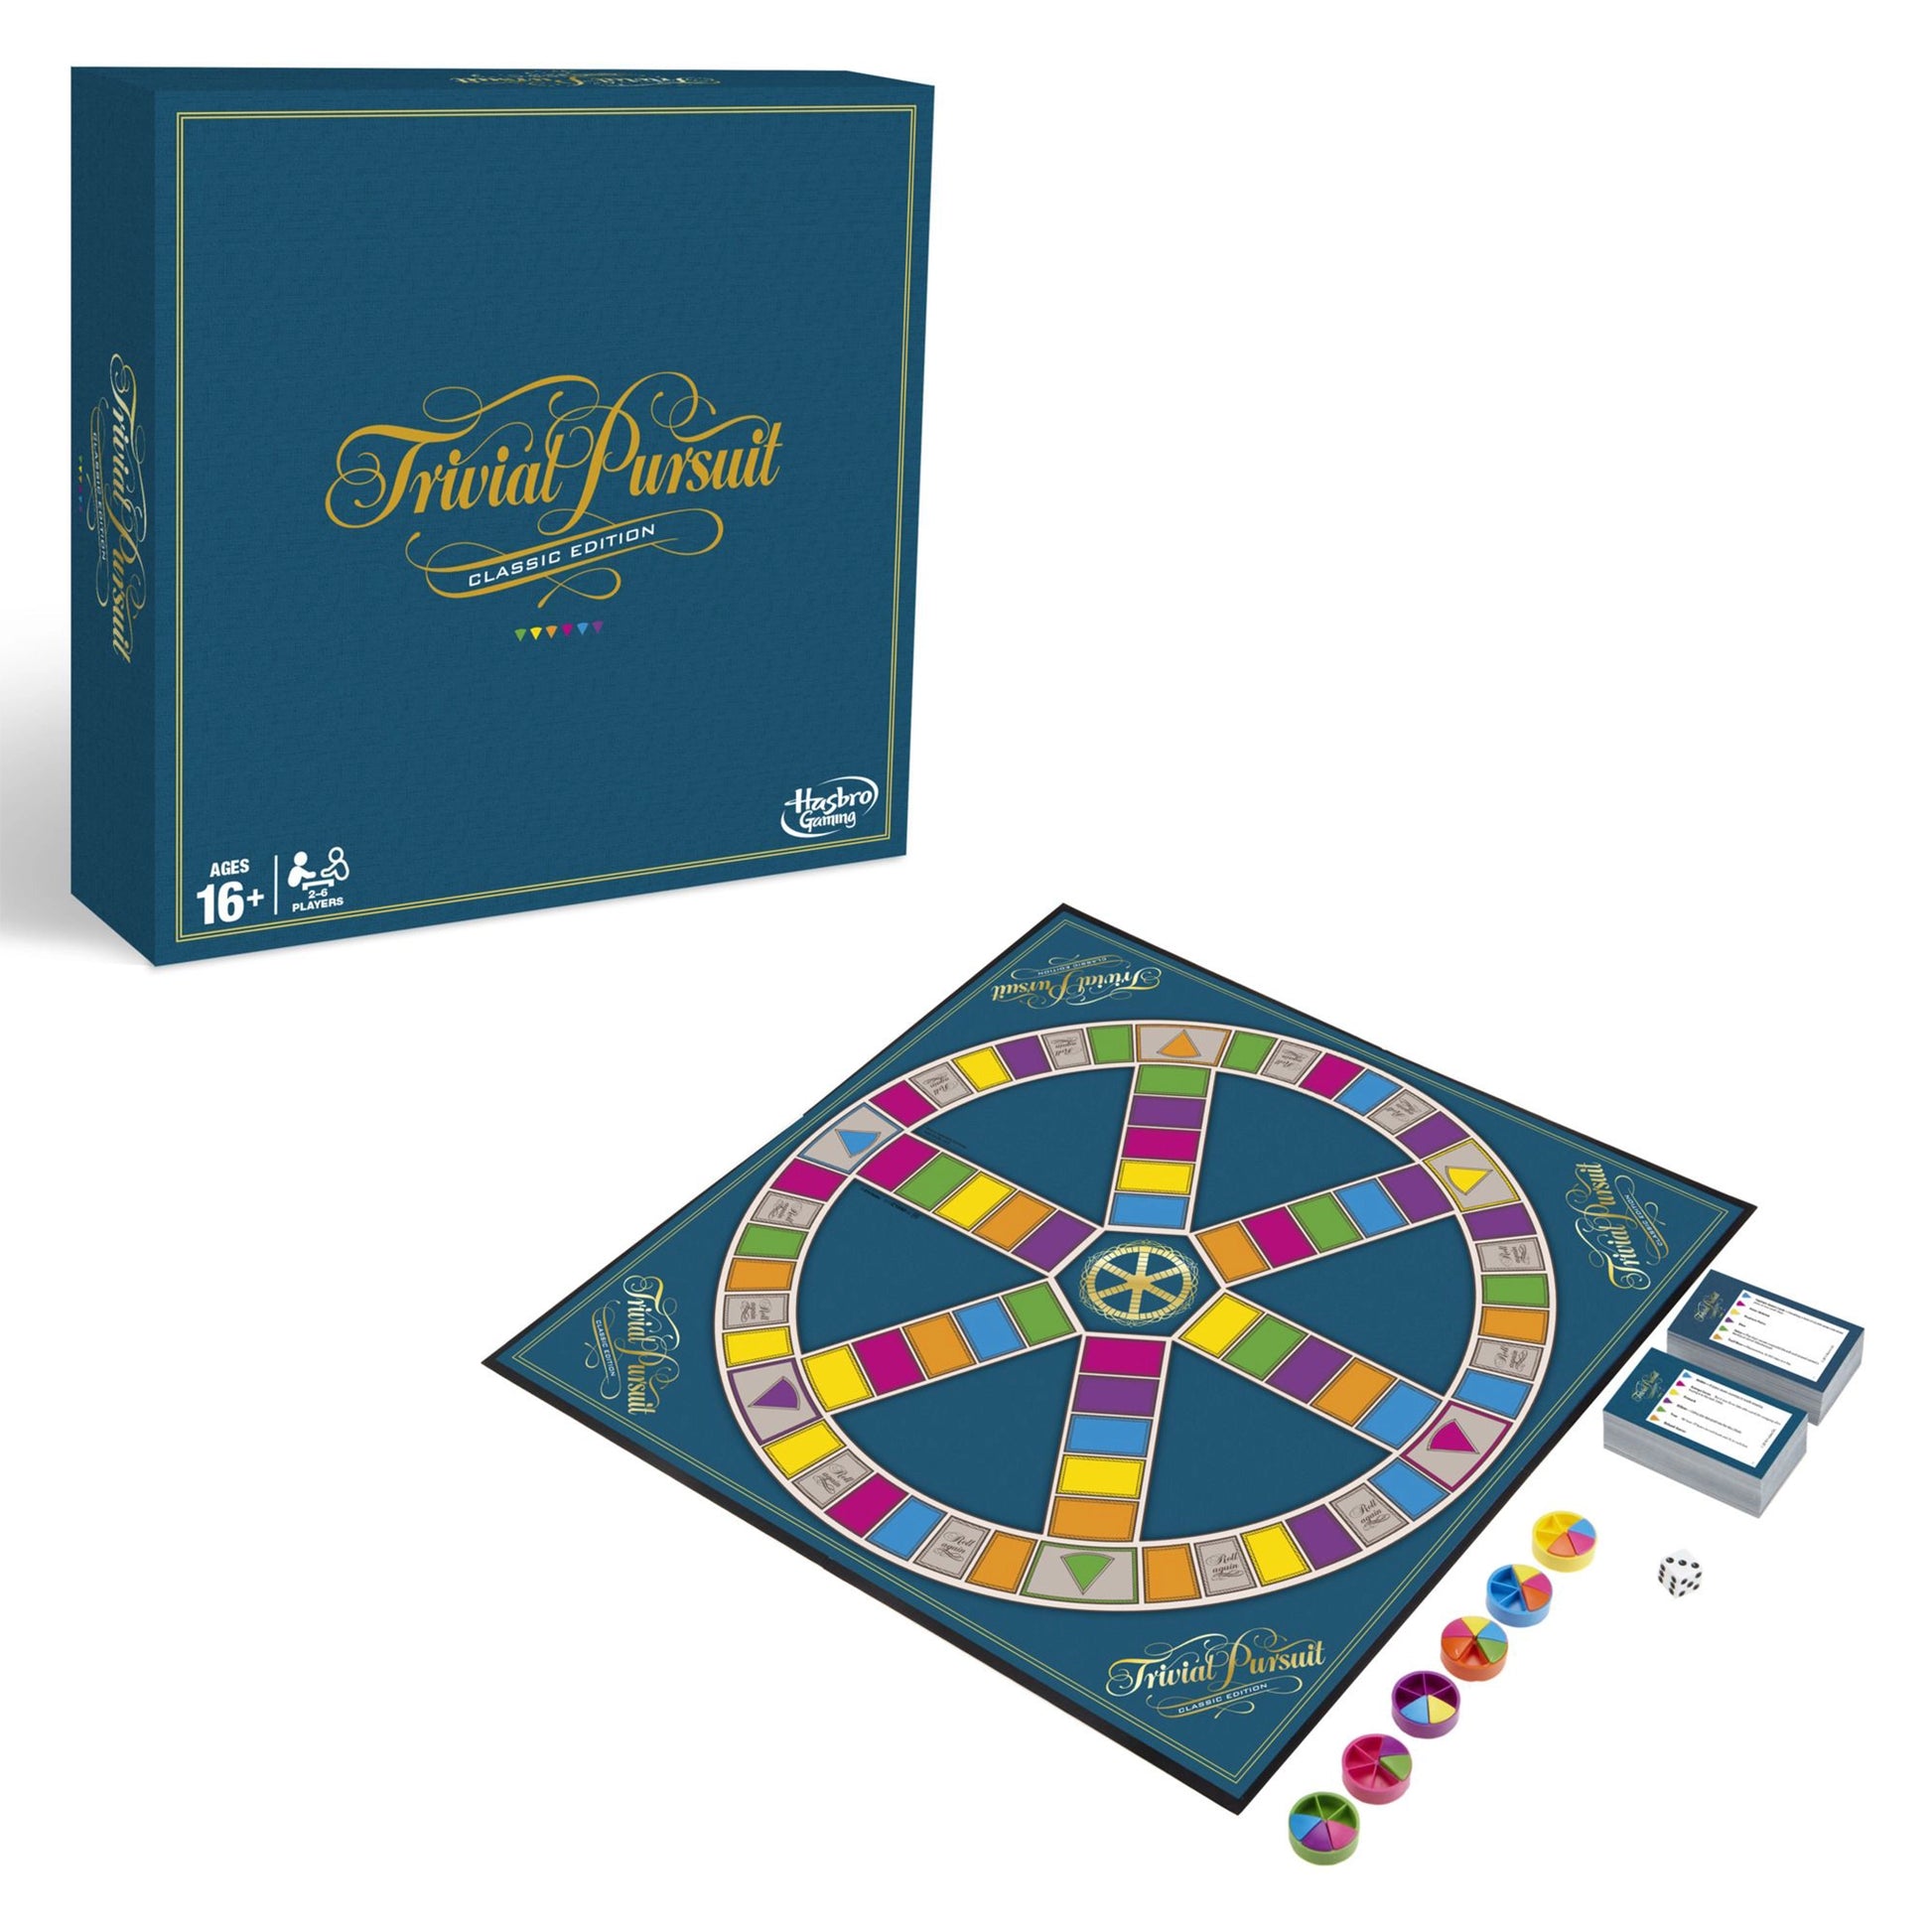 Trivial Pursuit Classic Game Board